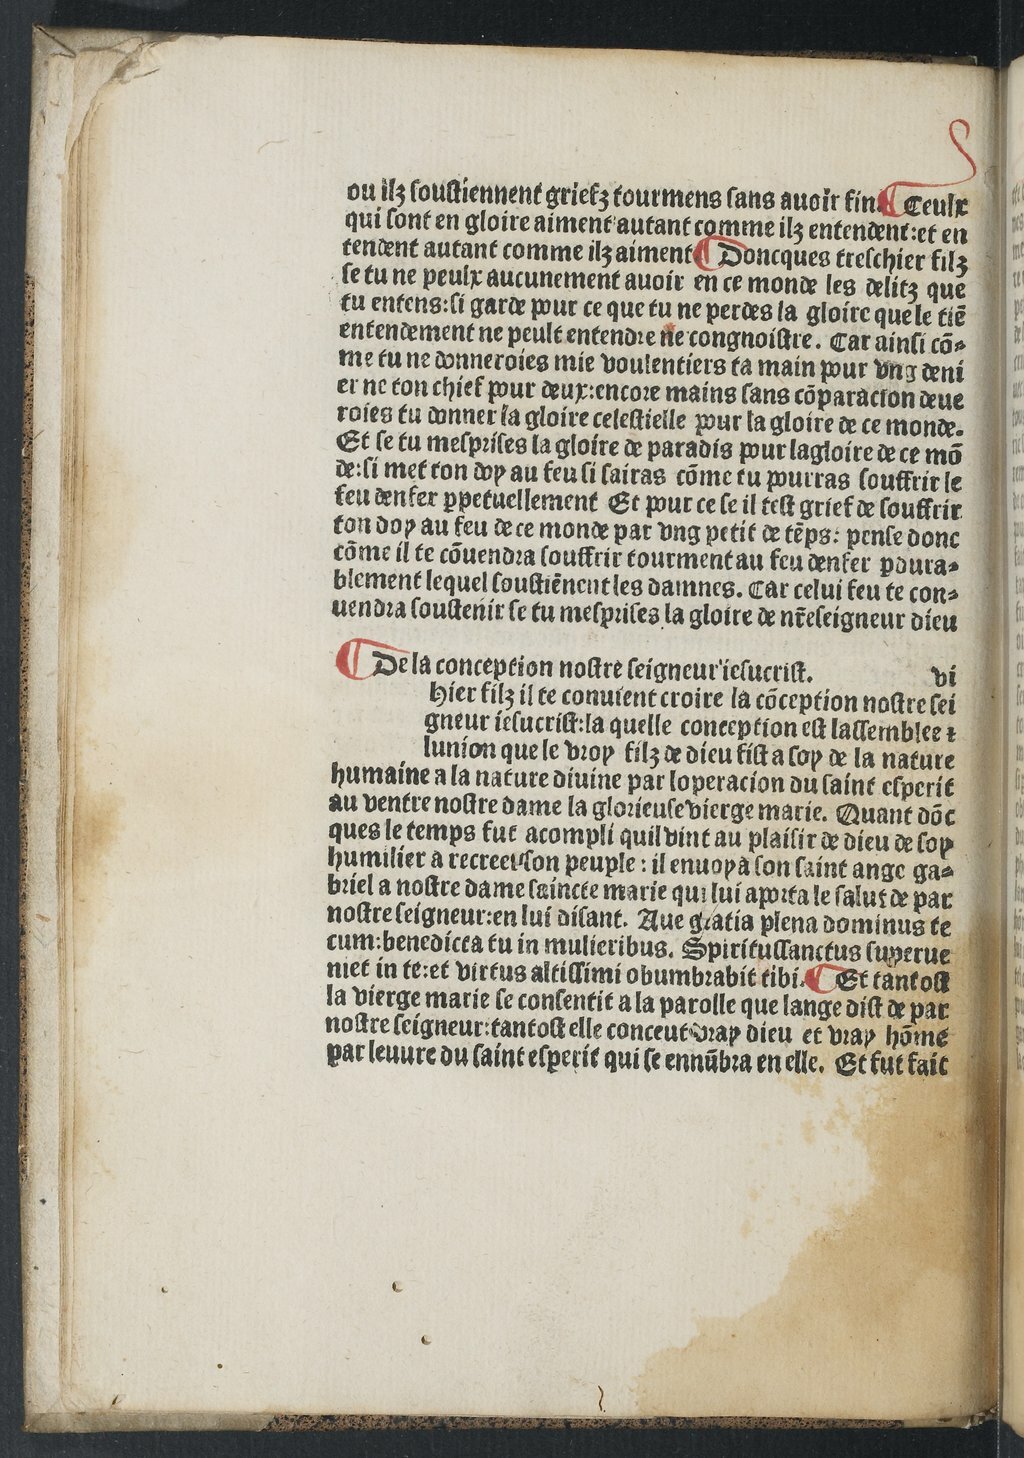 1482 [Antoine Caillaut] Trésor des humains BnF_Page_014.jpg